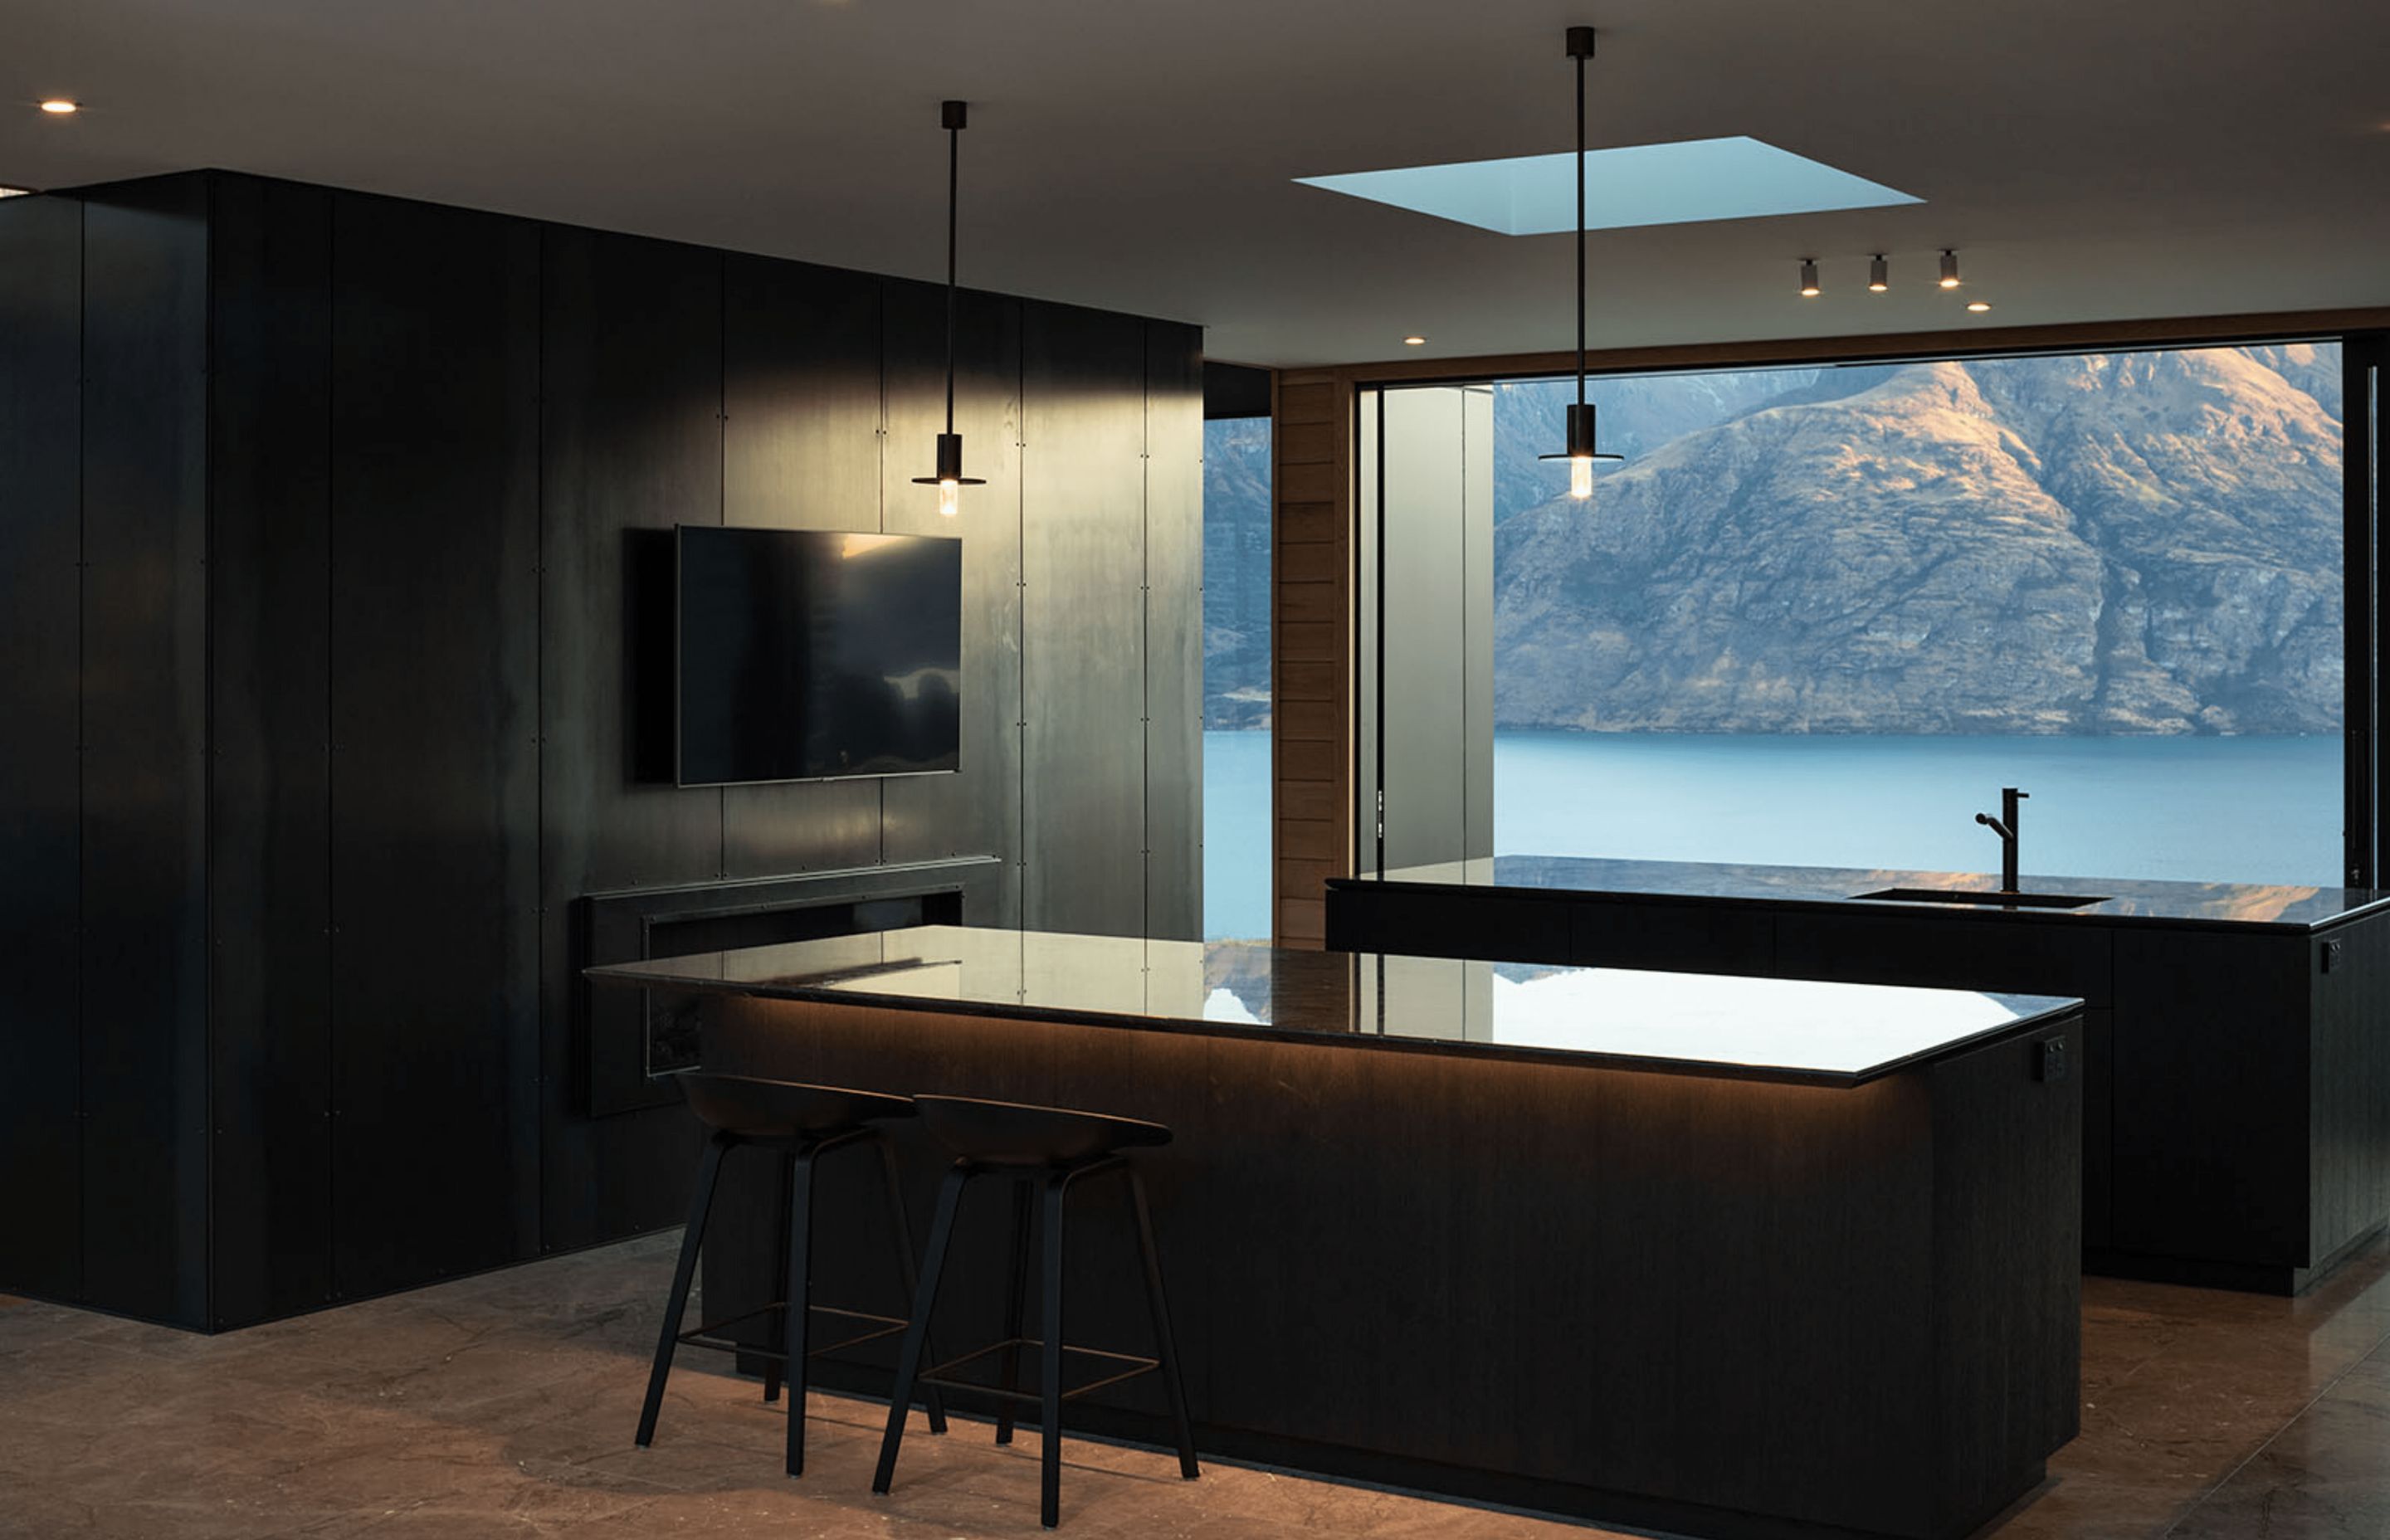 On either side of the kitchen are glass sliders that feature stunning views of the lake on one side, and the mountains on the other.